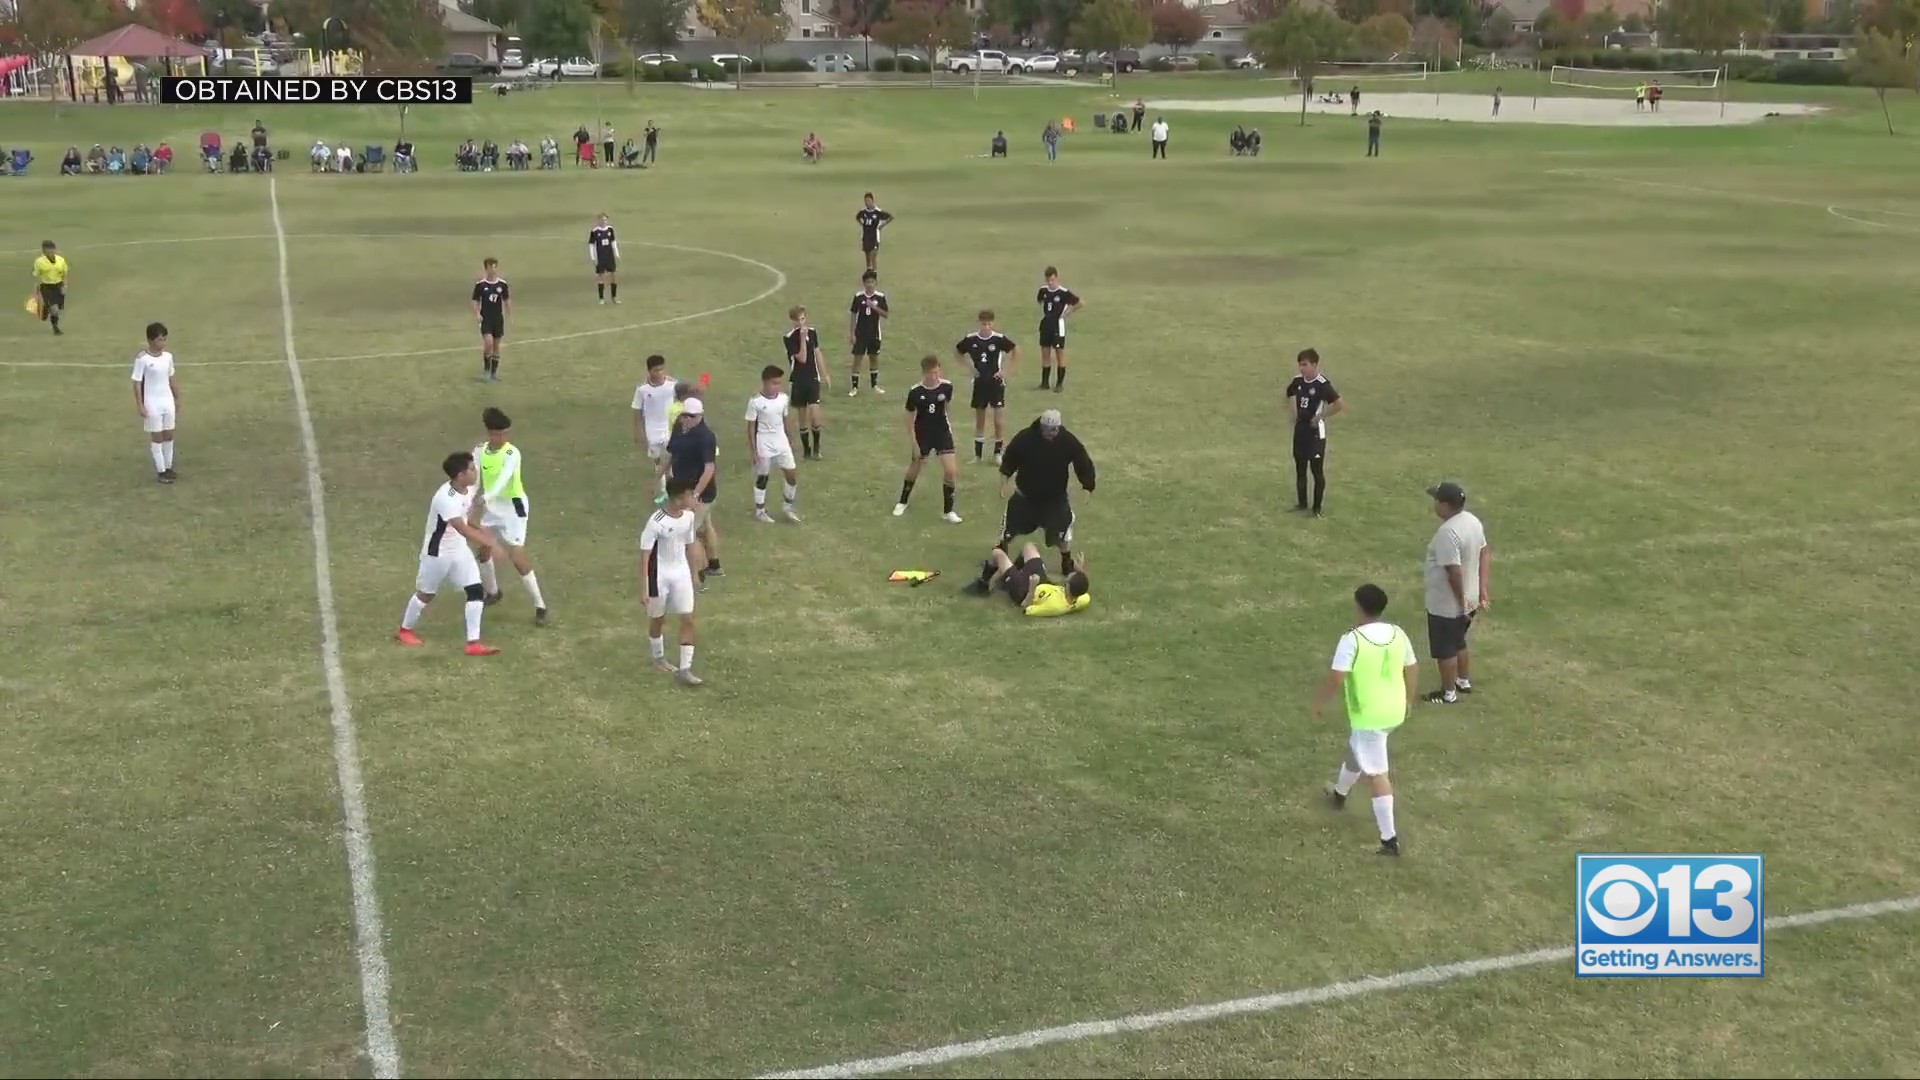 WATCH: Angry Dad Tackles Youth Soccer Ref After Controversial Call